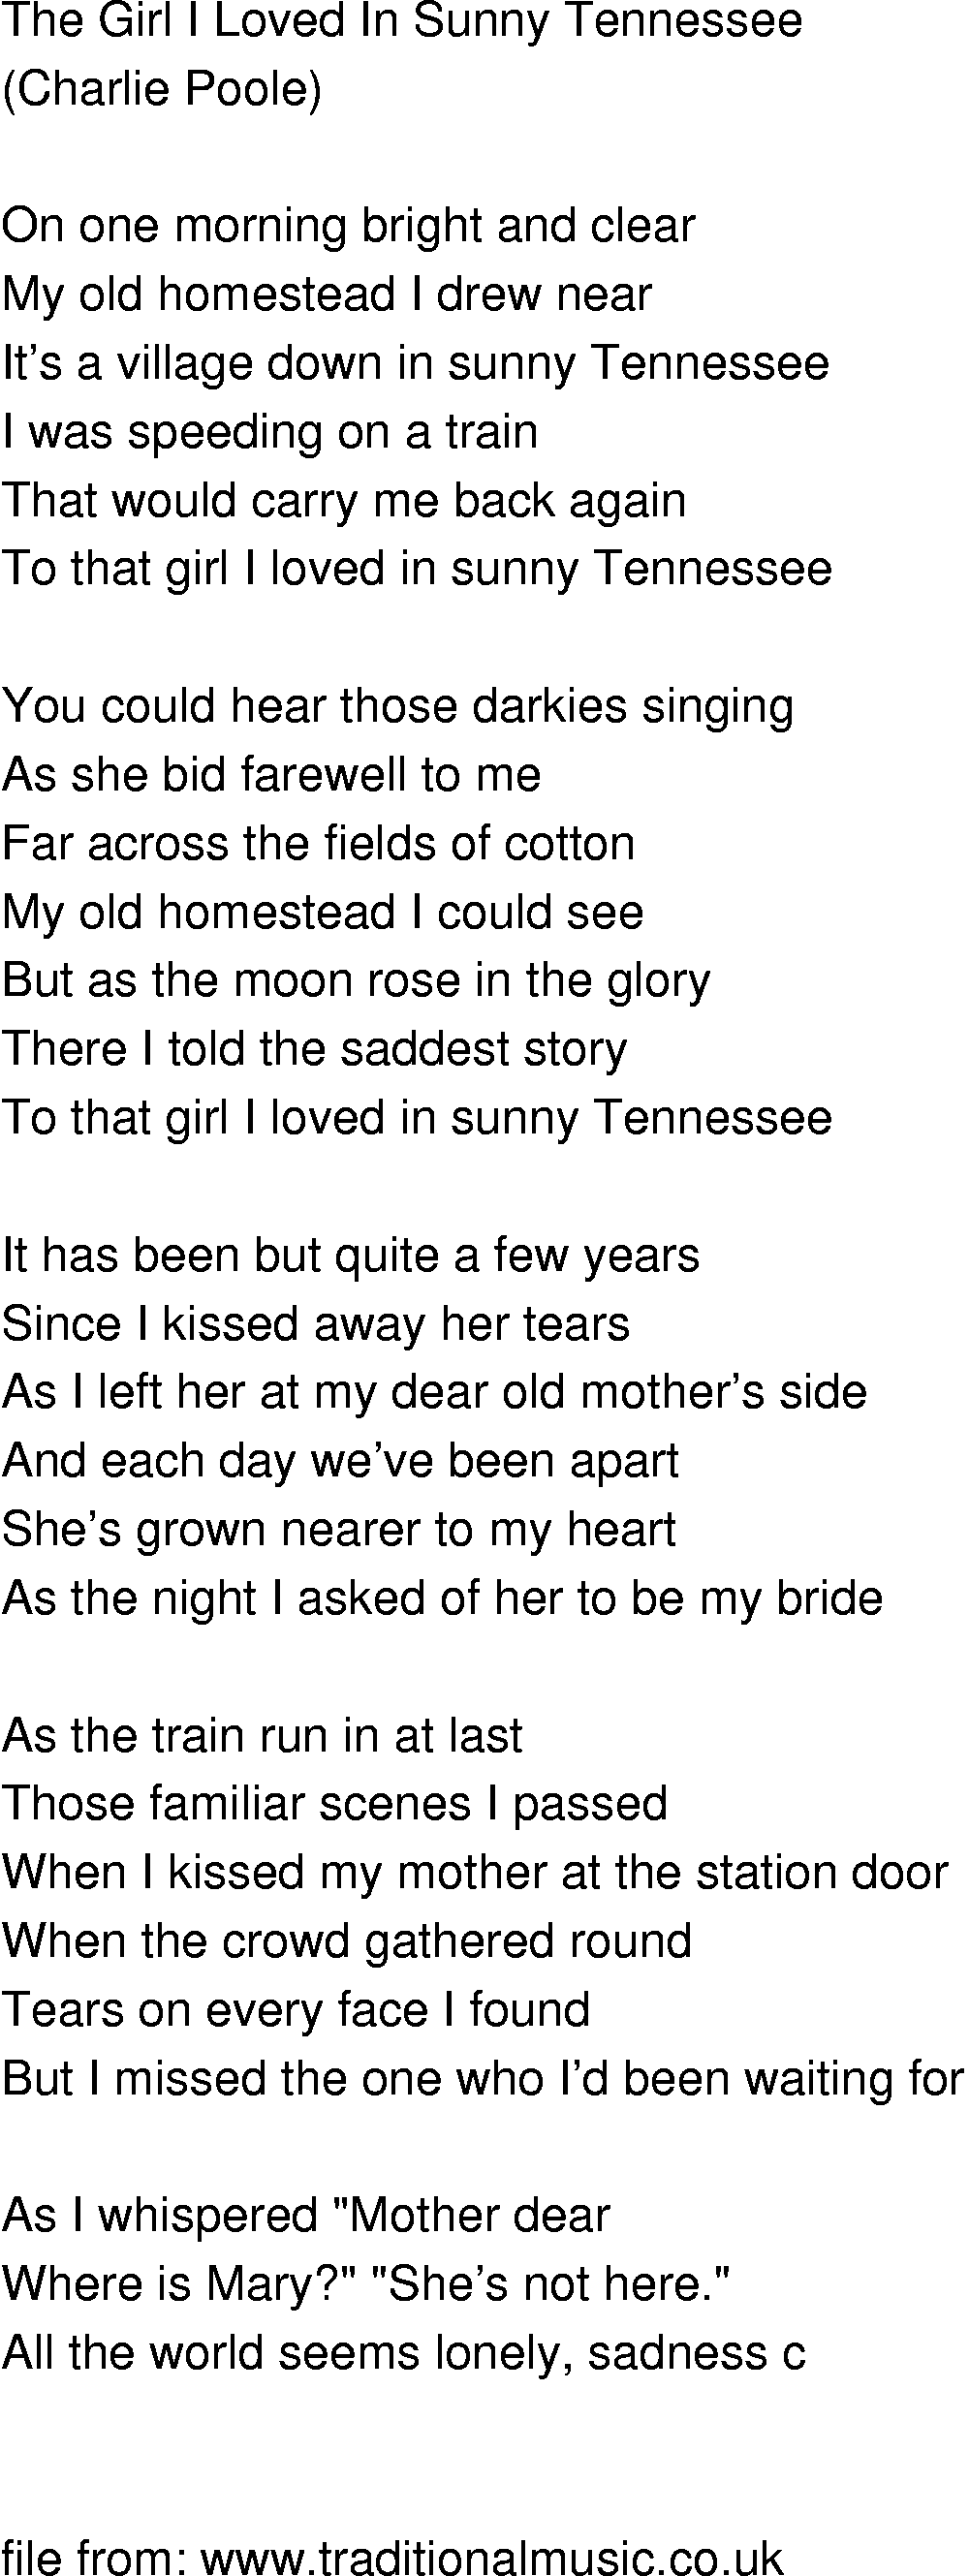 Old-Time (oldtimey) Song Lyrics - the girl i loved in sunny tennessee